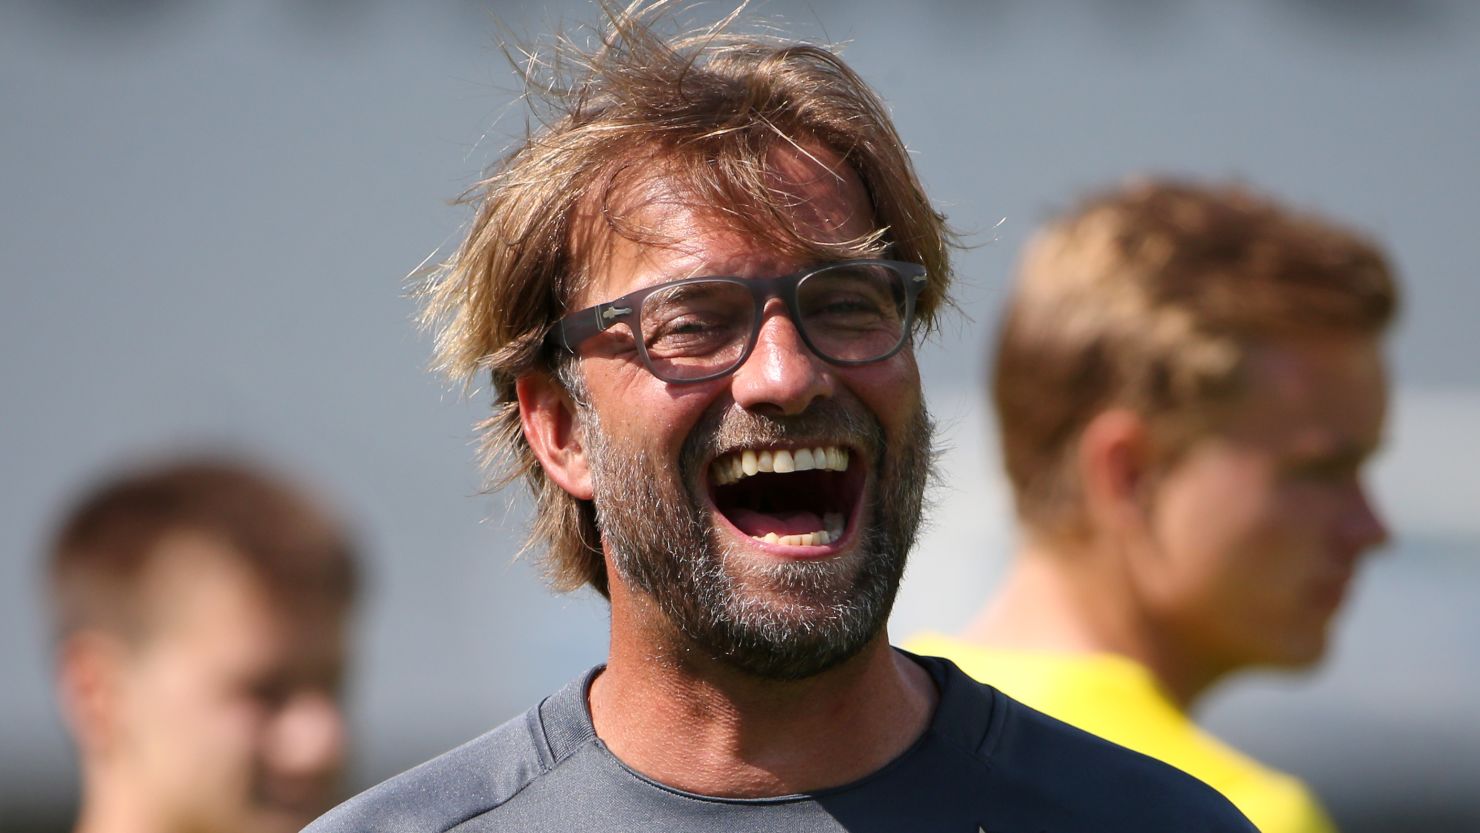 Klopp laughs during a training session in a Borussia Dortmund training camp in July 2014.